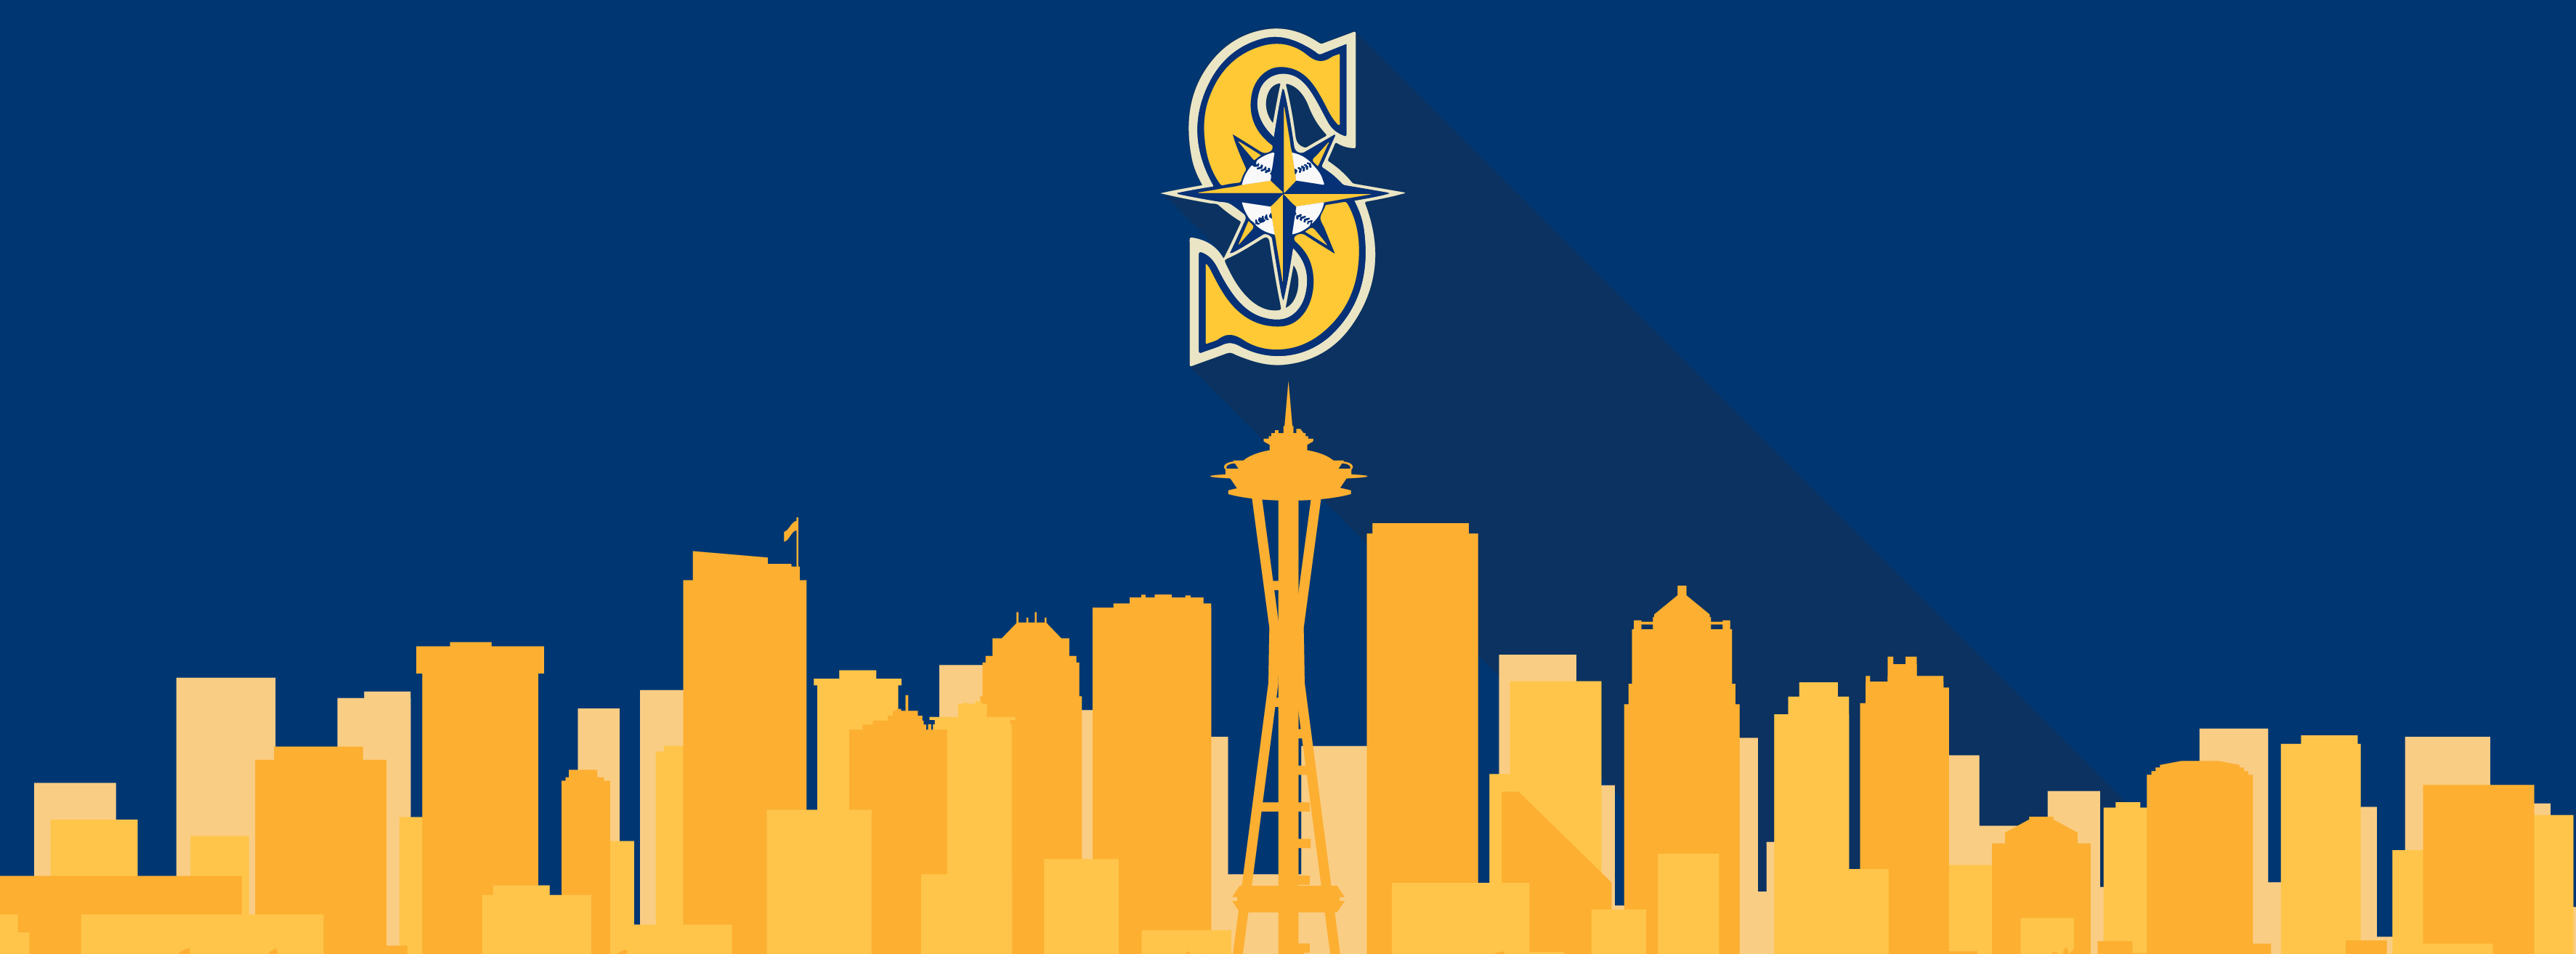 Seattle Mariners Wallpapers